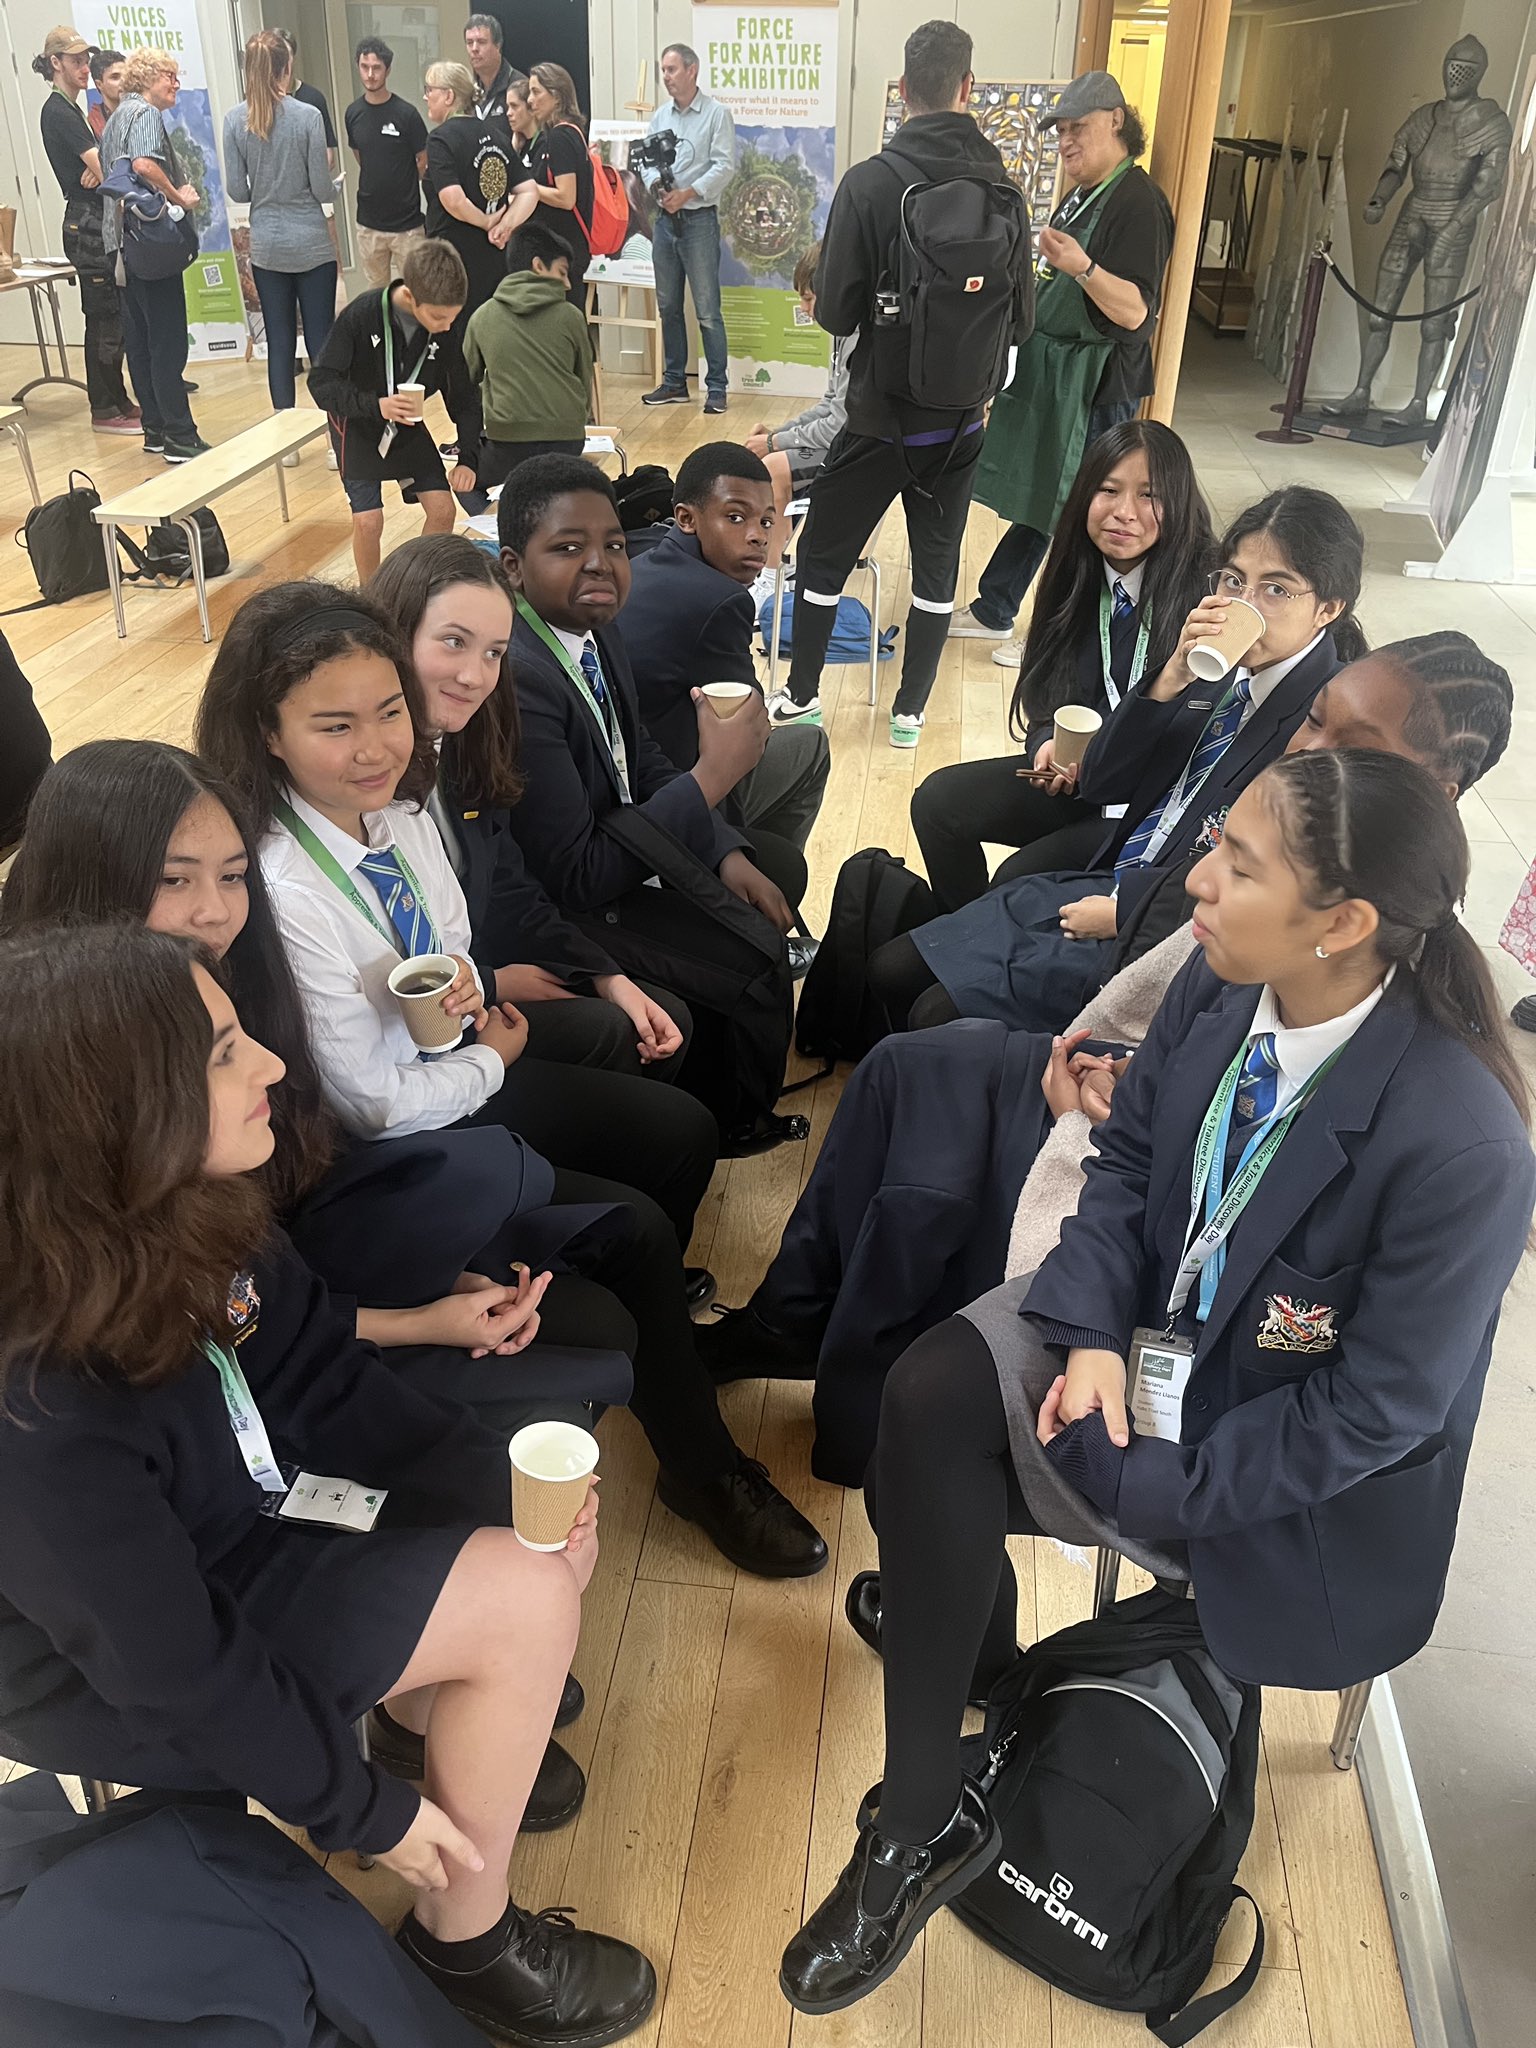 Haberdashers' Hatcham College on X: It was great to see the